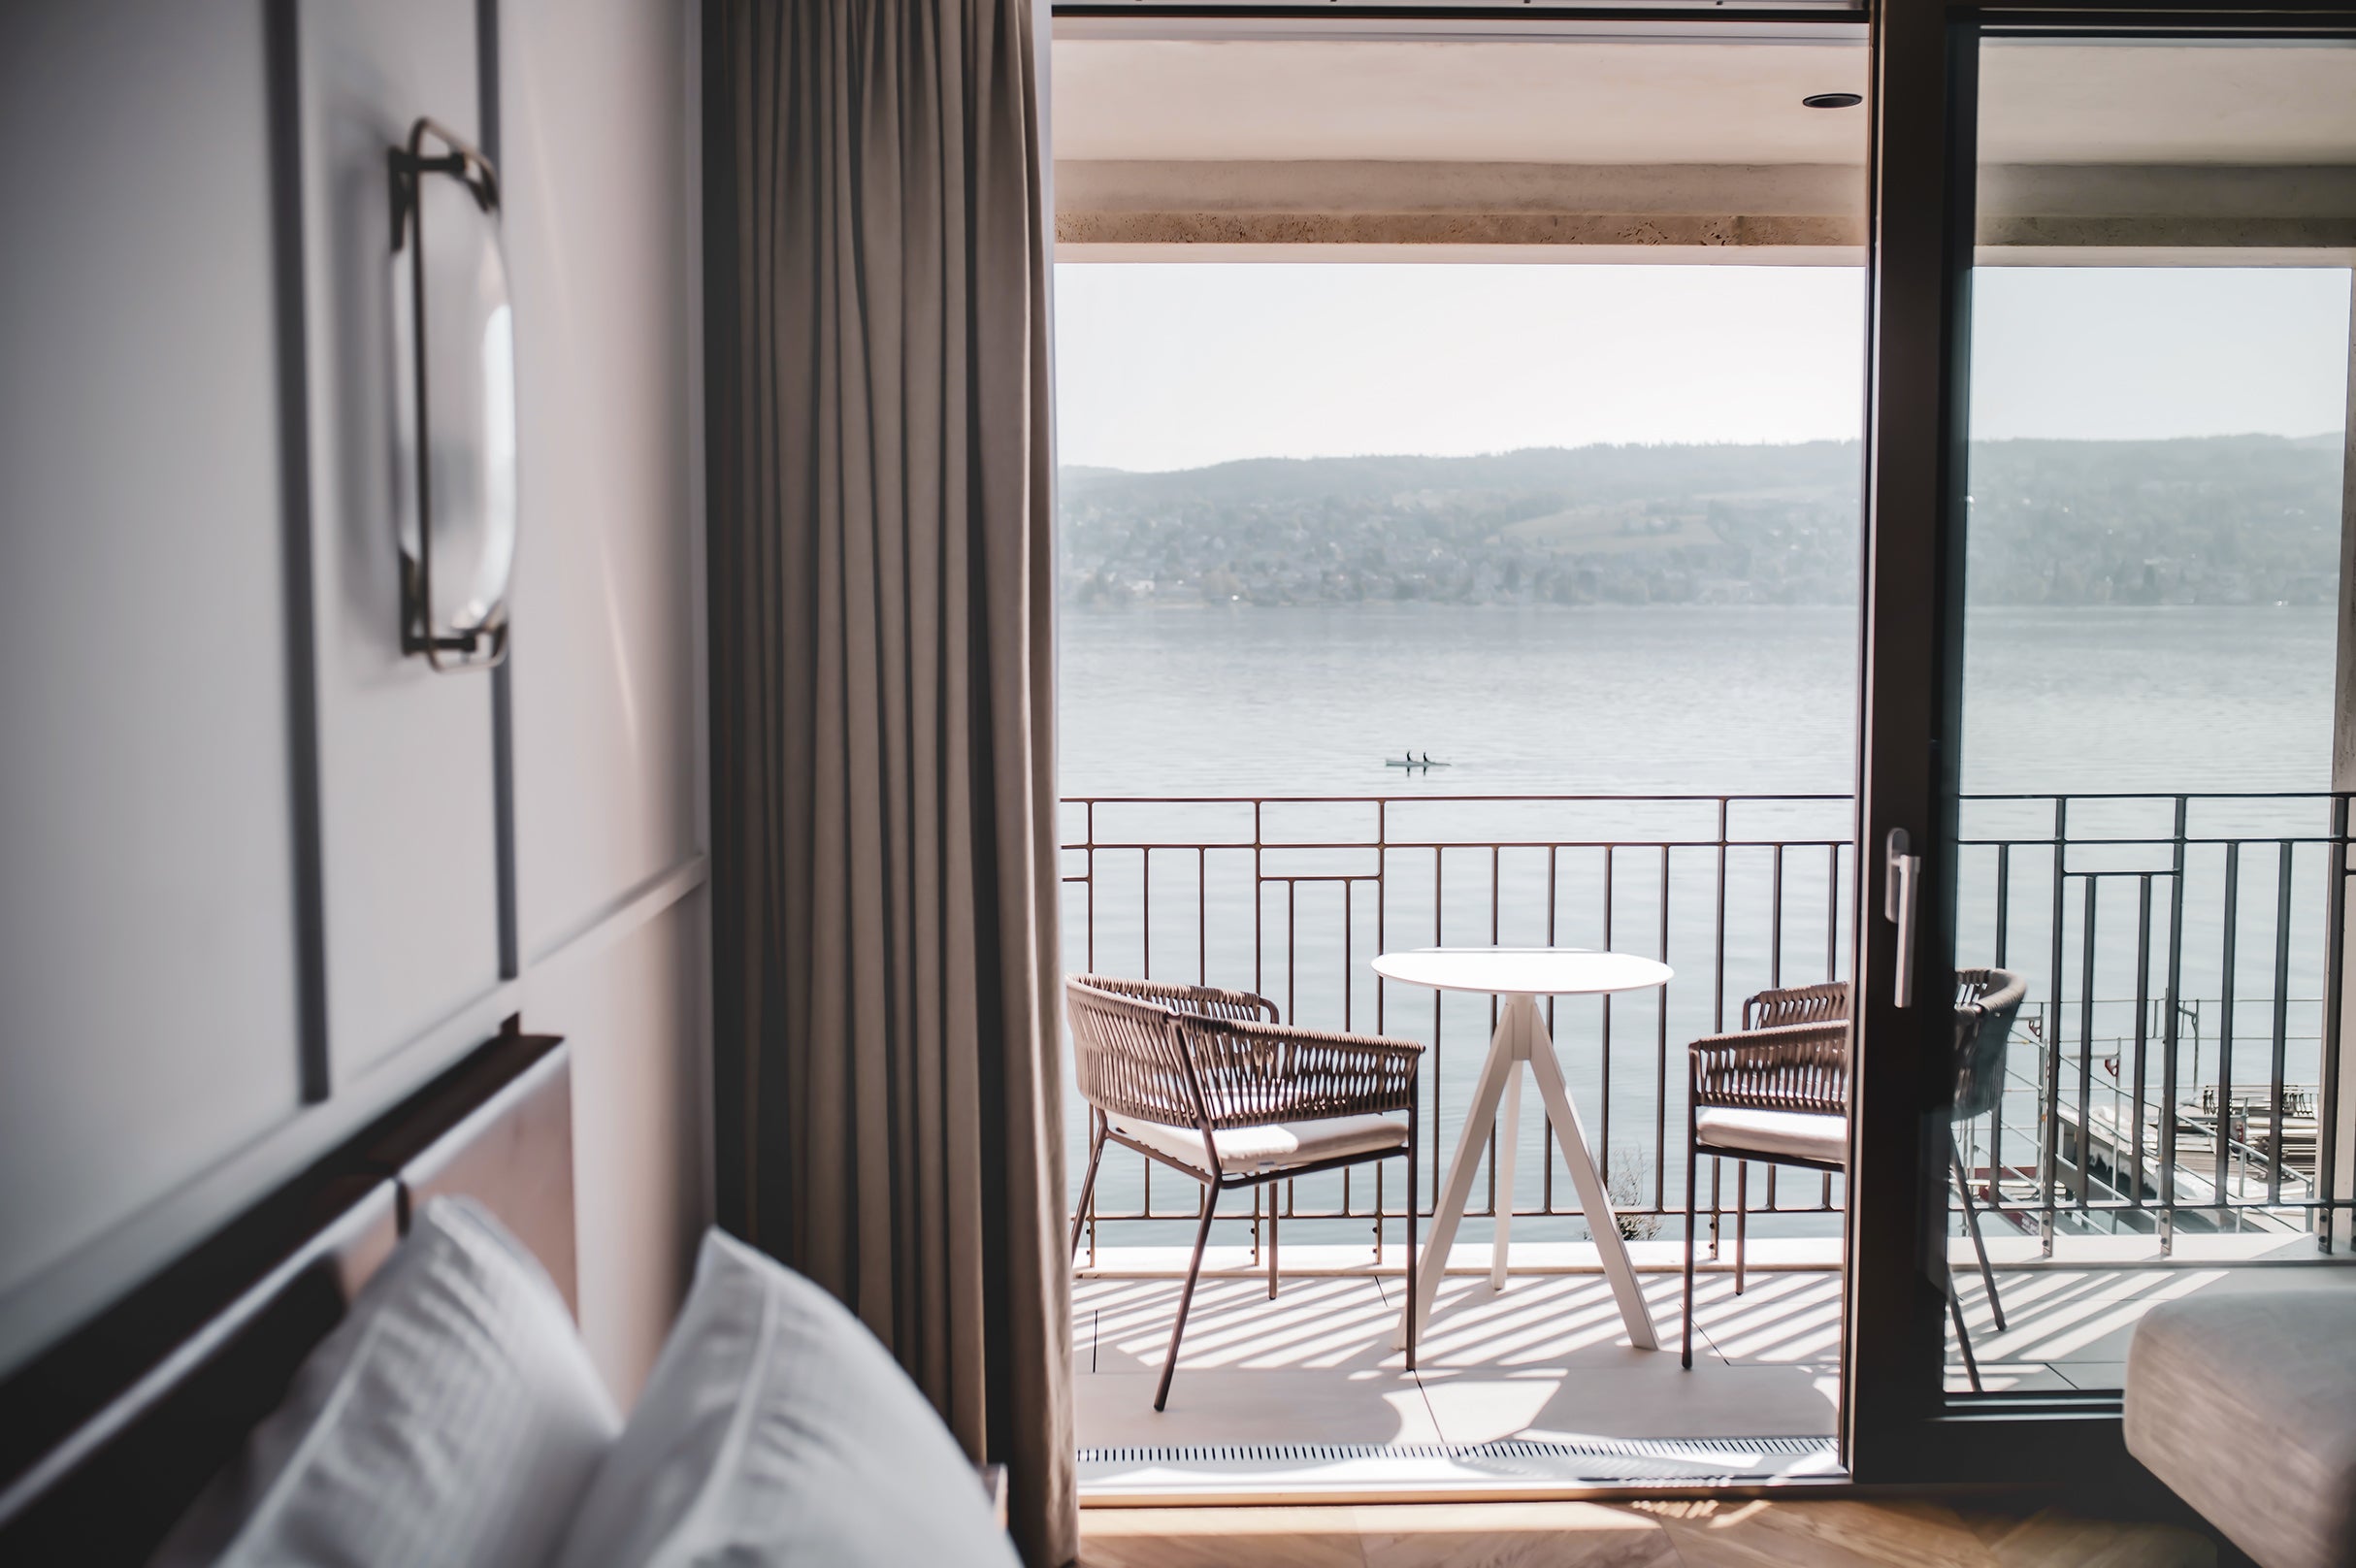 Alex hotel looks out over Lake Zurich